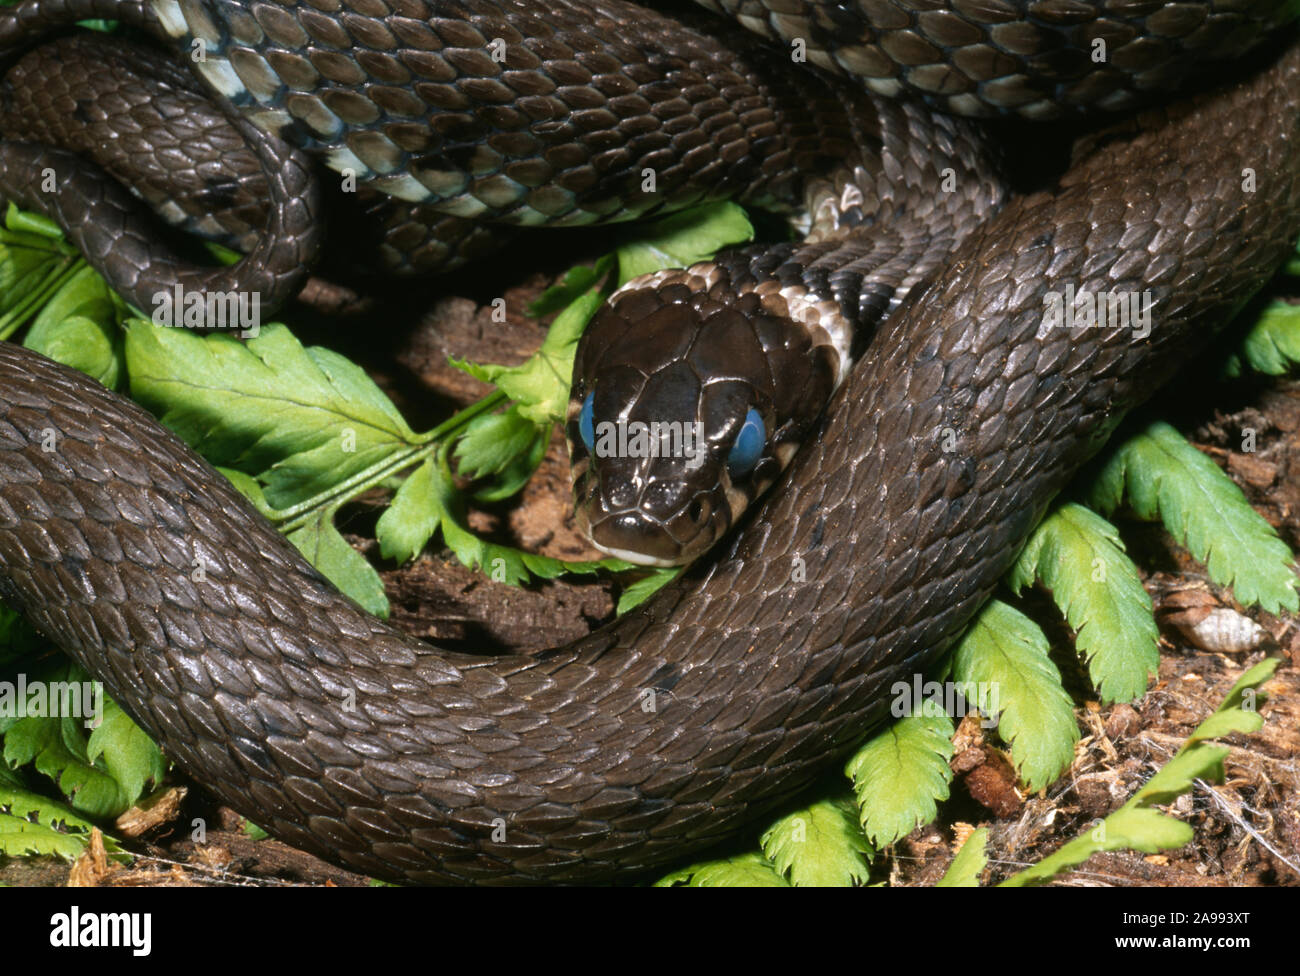 GRASS SNAKE on land.  (Natrix natrix).  General darkening and cloudy eyes indicative of sloughing, shedding skin, about to shed, in 2-3 days time. Ecd Stock Photo